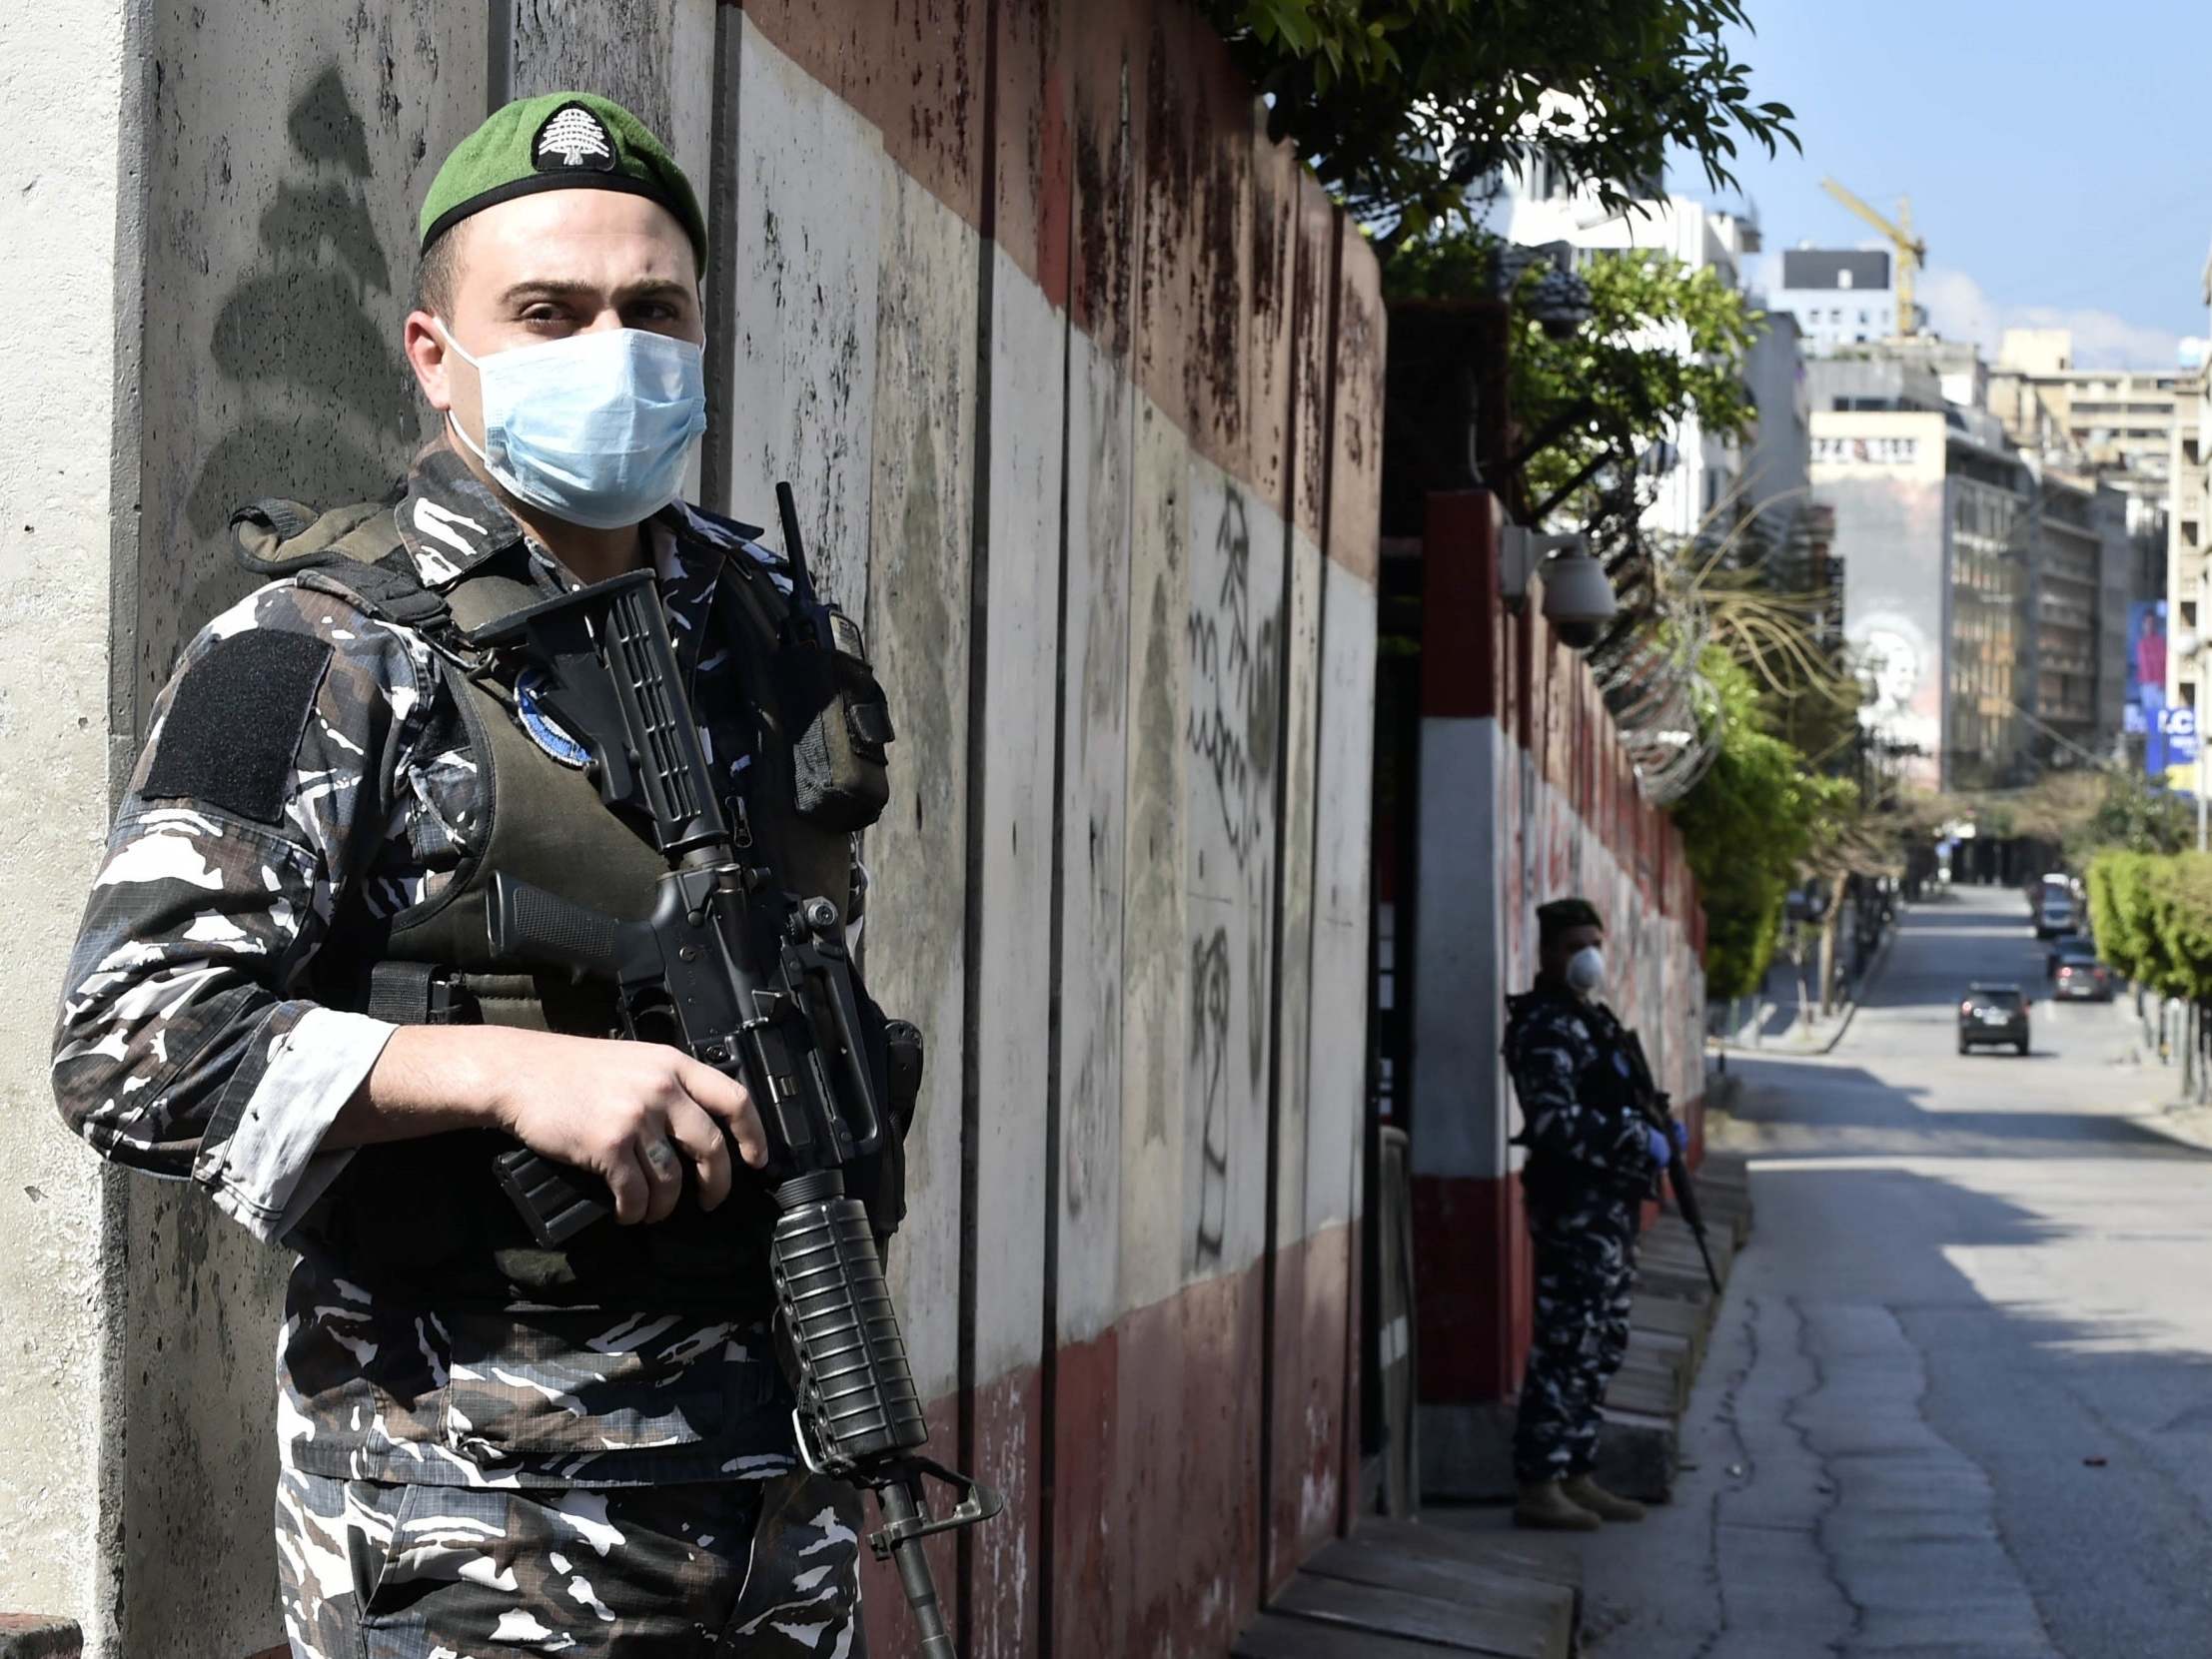 Security forces respond to the coronavirus outbreak in Beirut, Lebanon